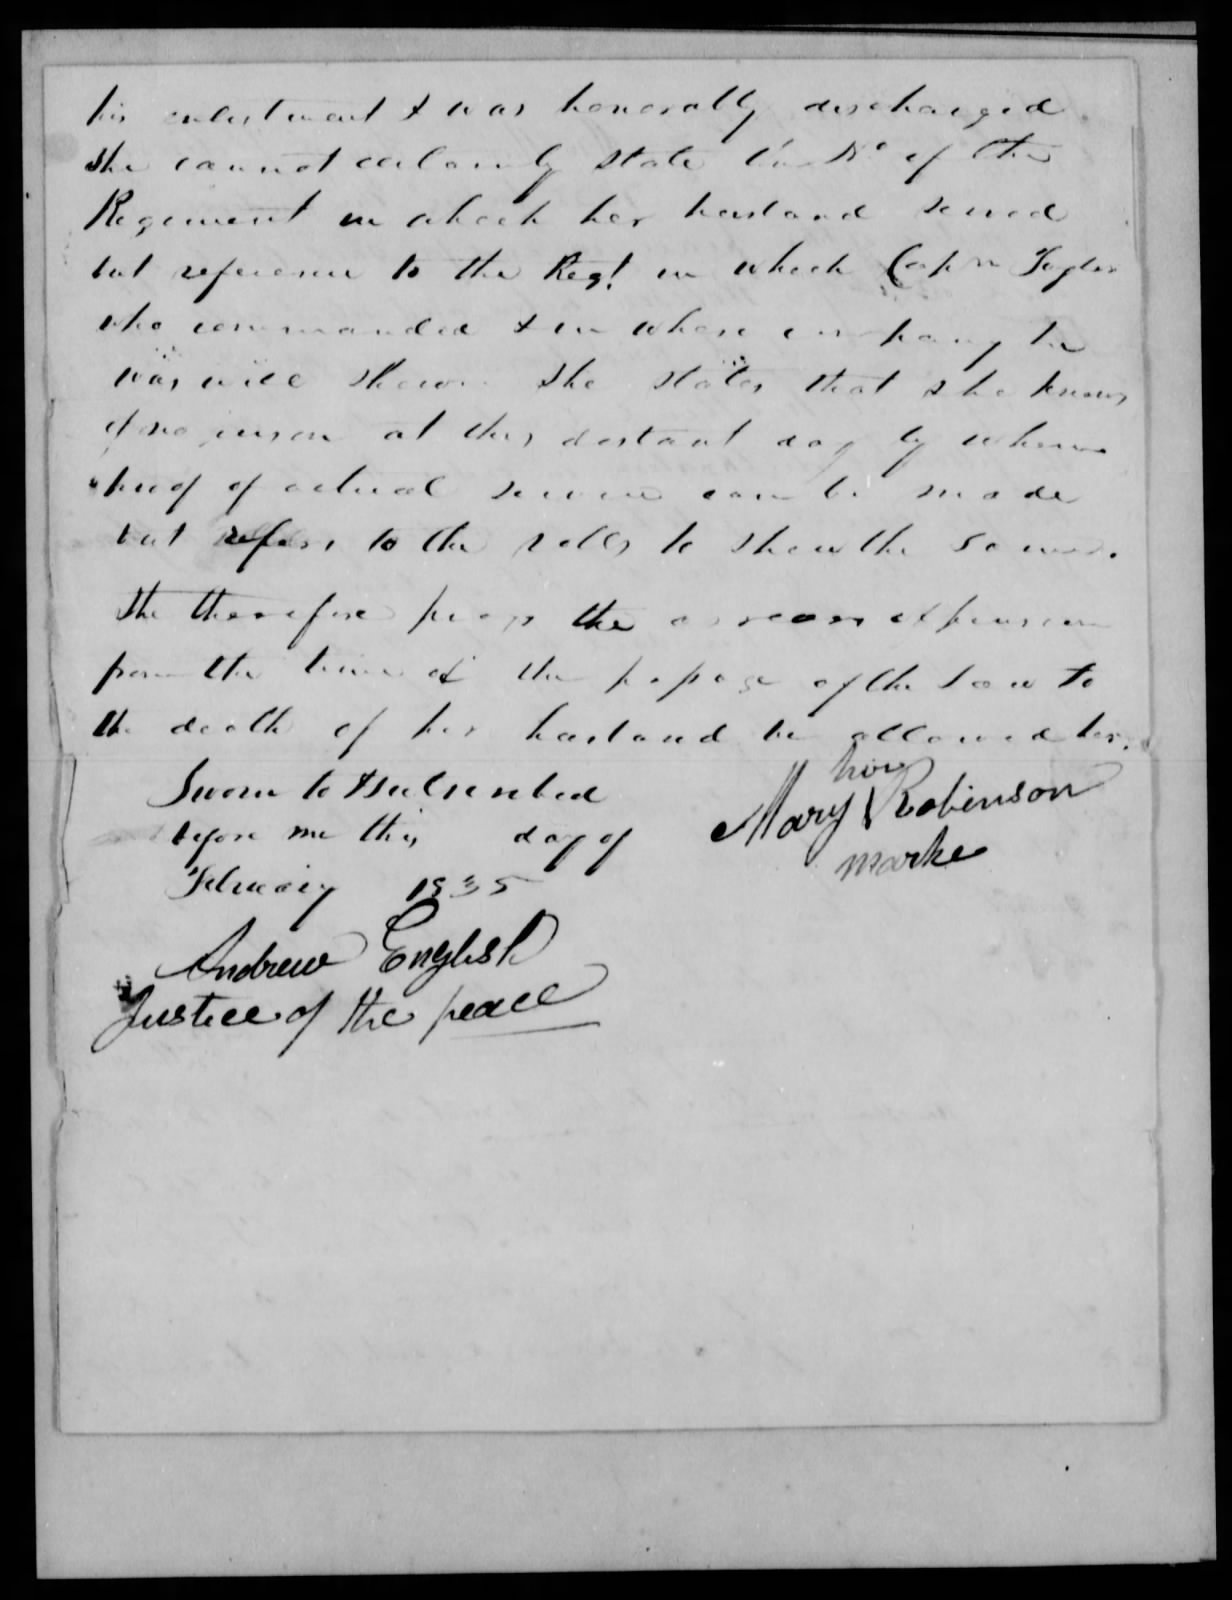 Application for a Widow's Pension from Mary Robison, February 1835, page 2